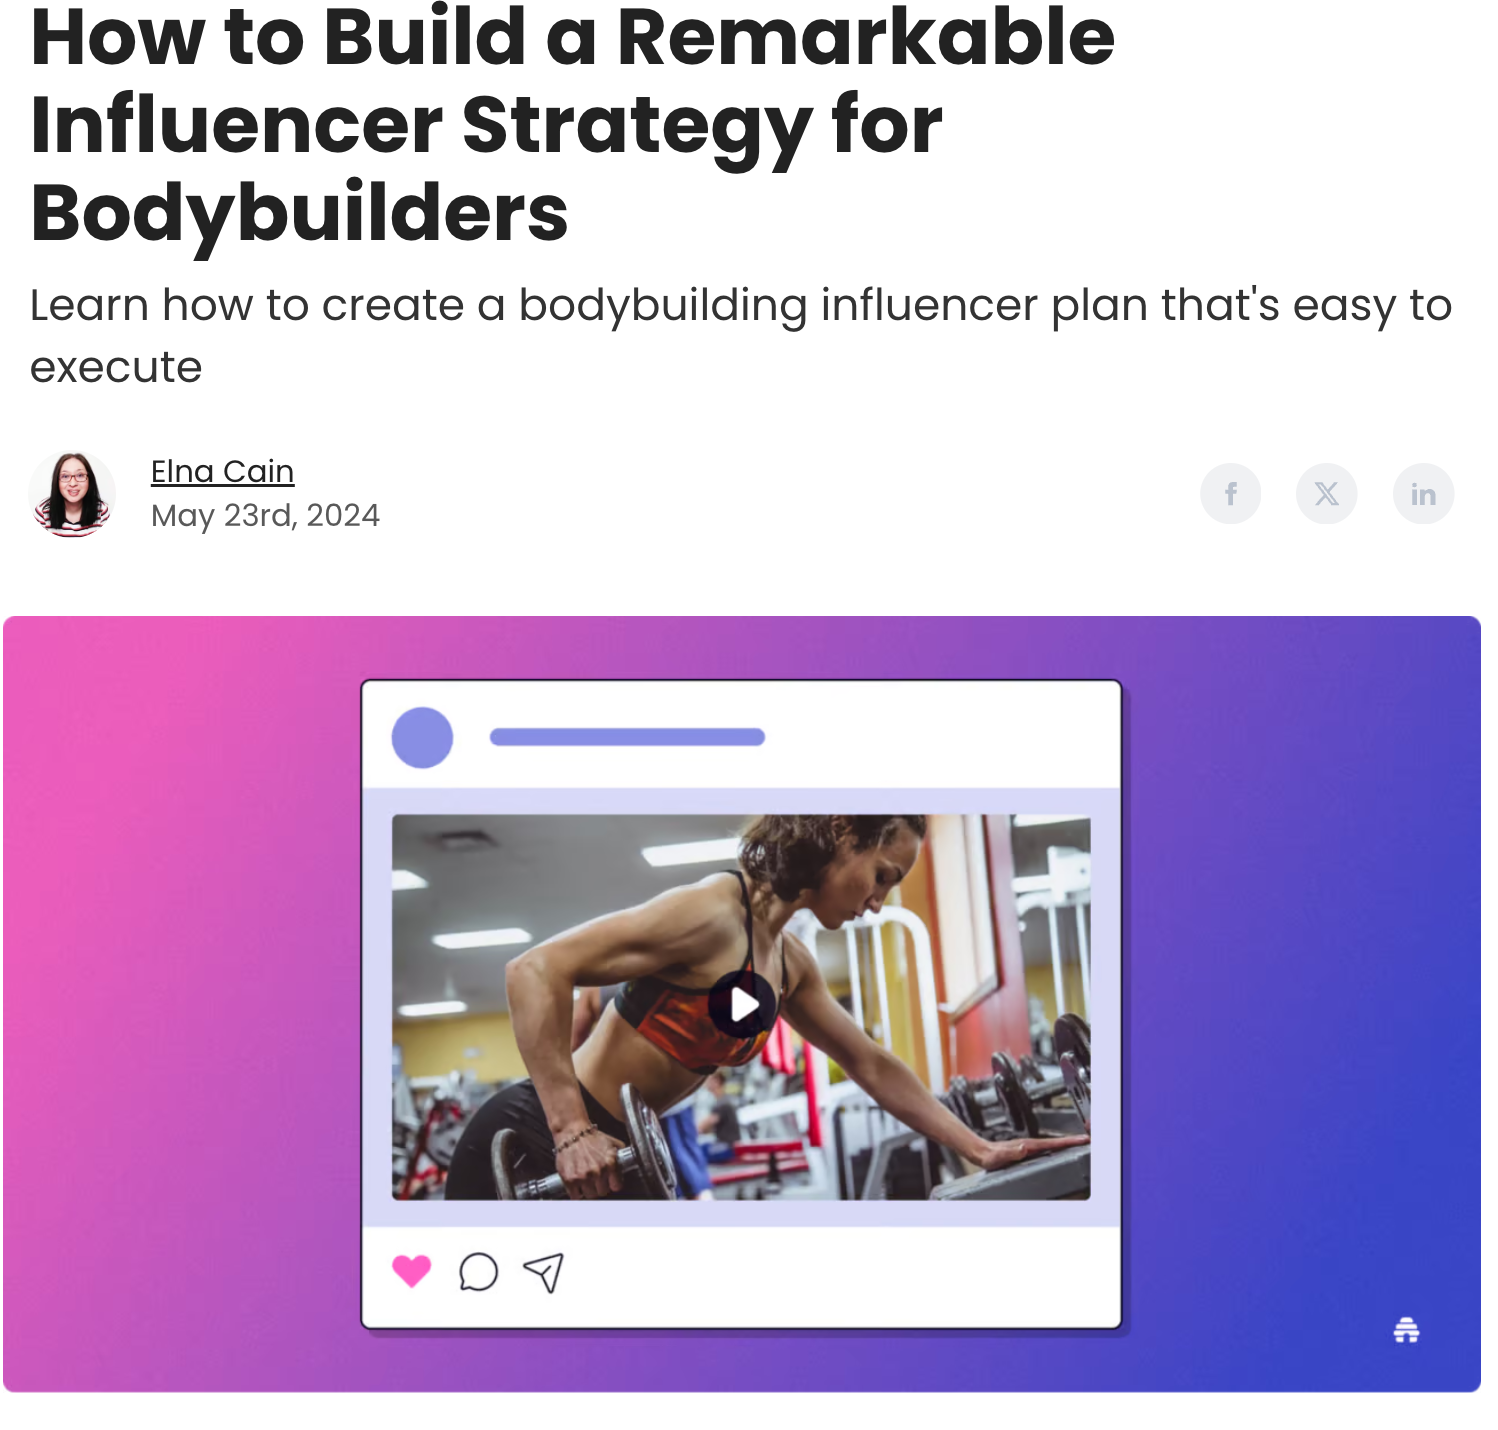 How to Build a Remarkable Influencer Strategy for Bodybuilders